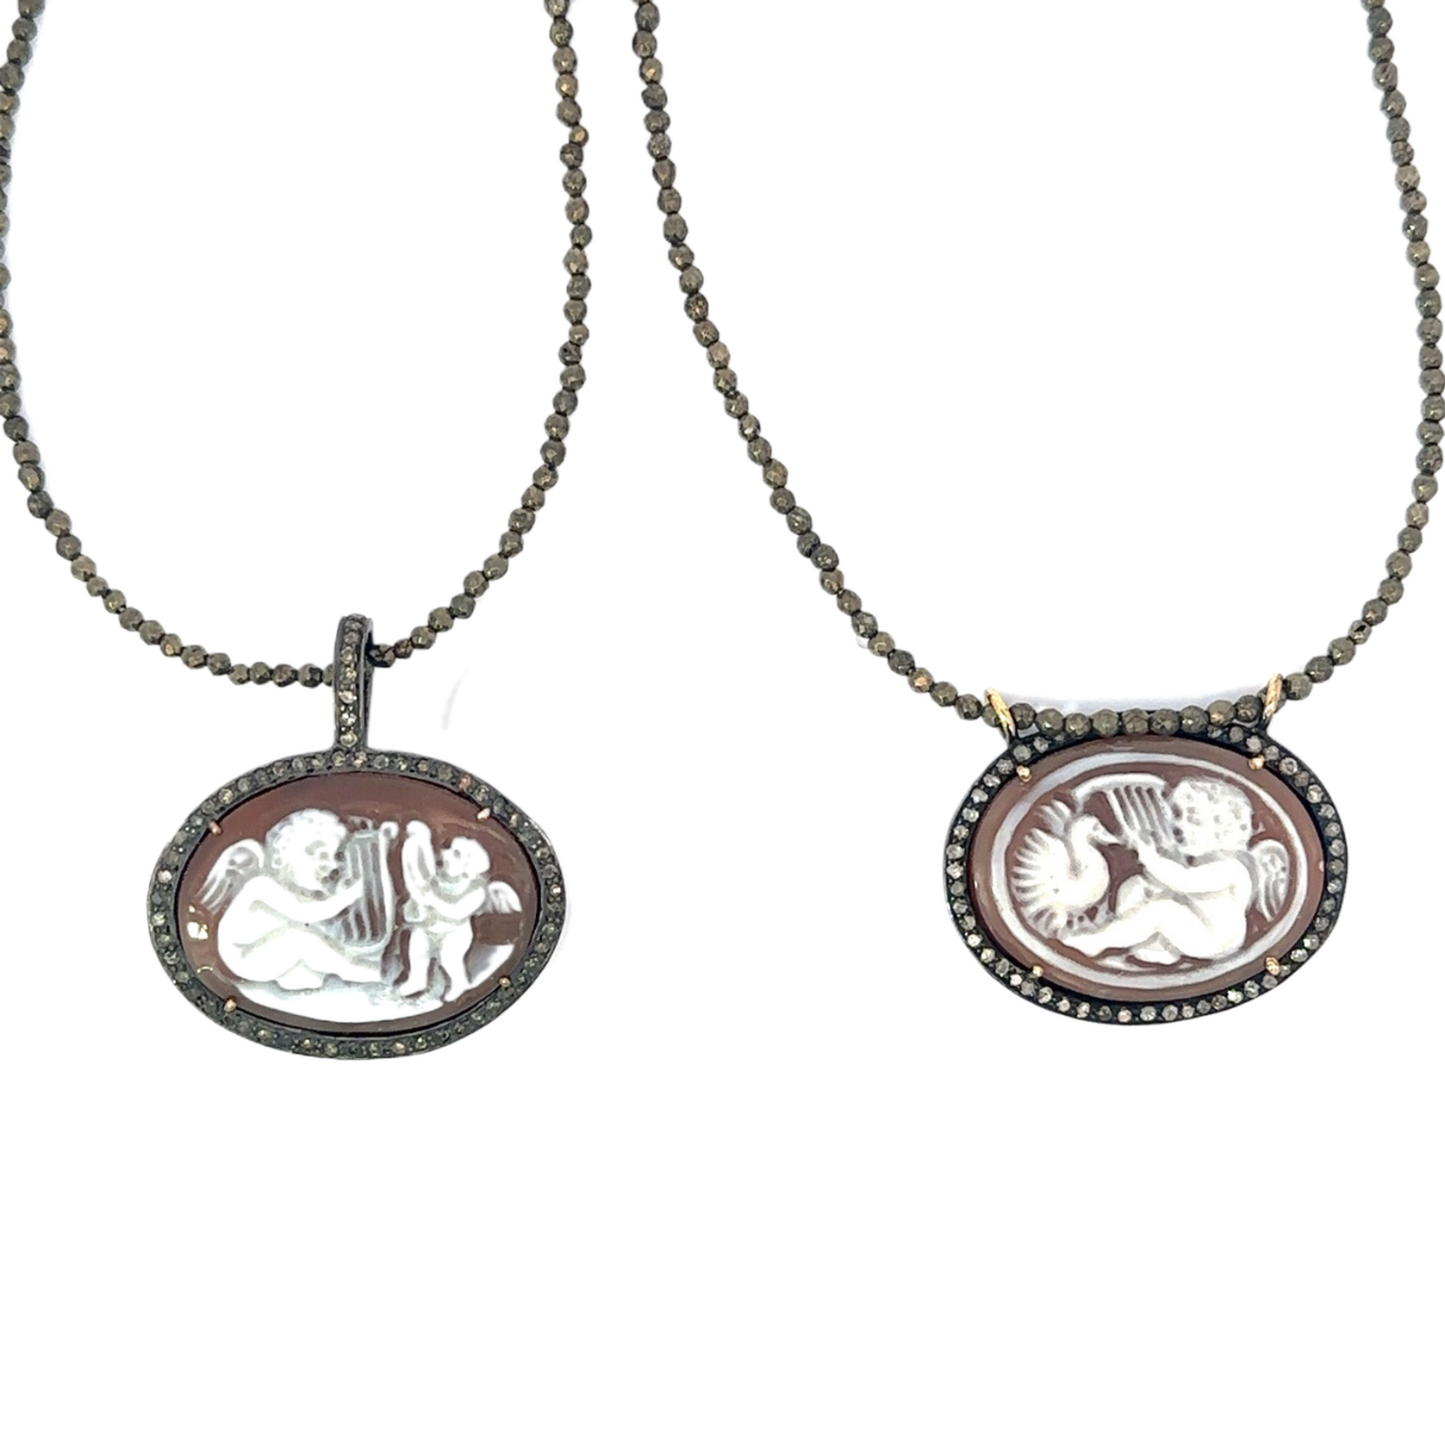 Cherub Oval Cameo Strung Pyrite Necklace with Pave Border